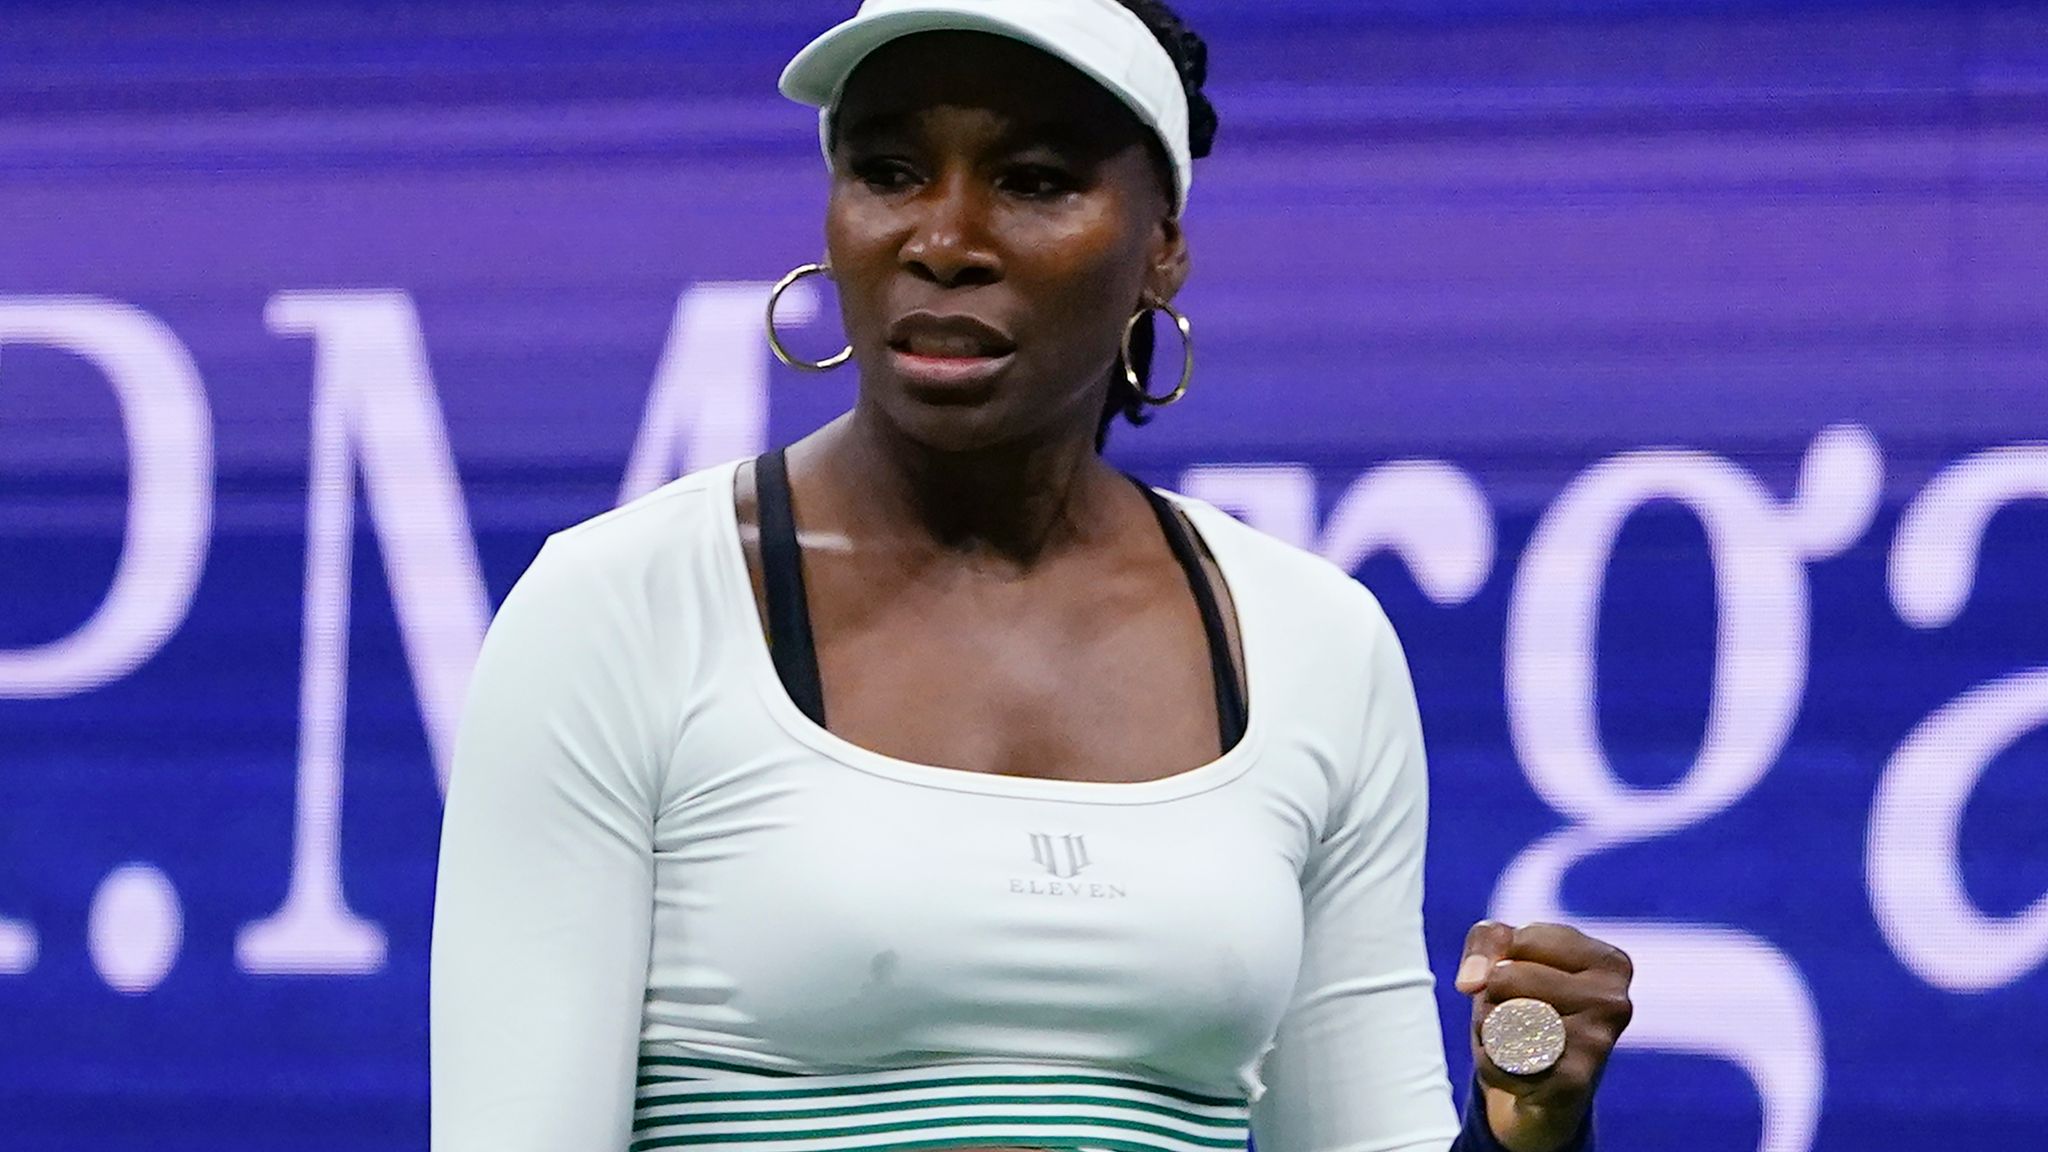 Venus Williams to play at the Australian Open